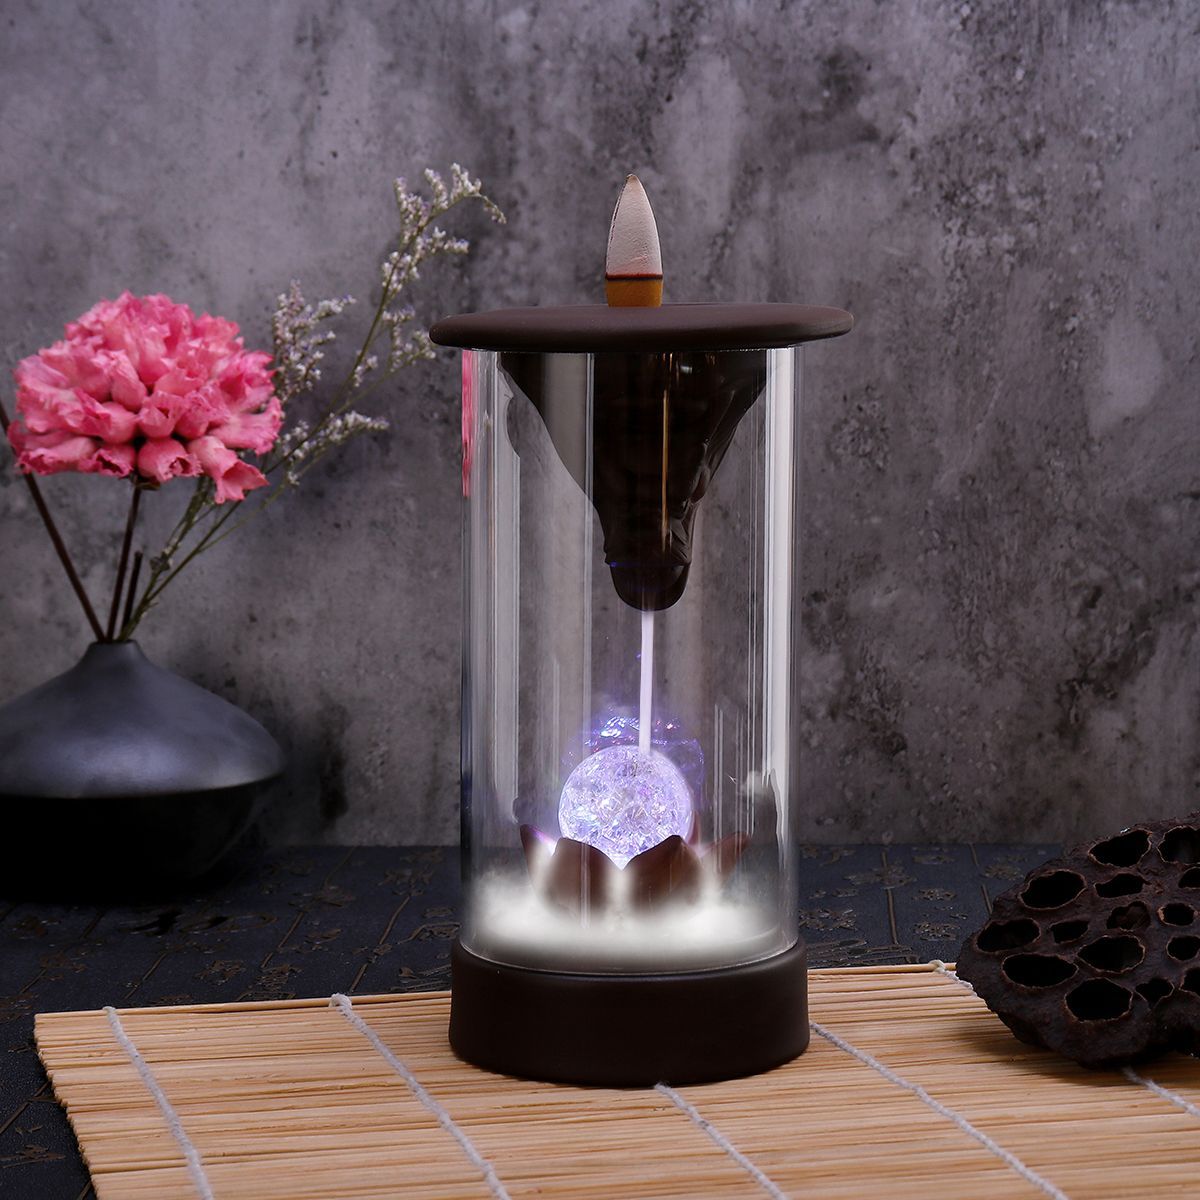 7-Color-LED-Changing-Incense-Burner-Backflow-Waterfall-Smoke-Censer-Holder-with-Cones-1416347